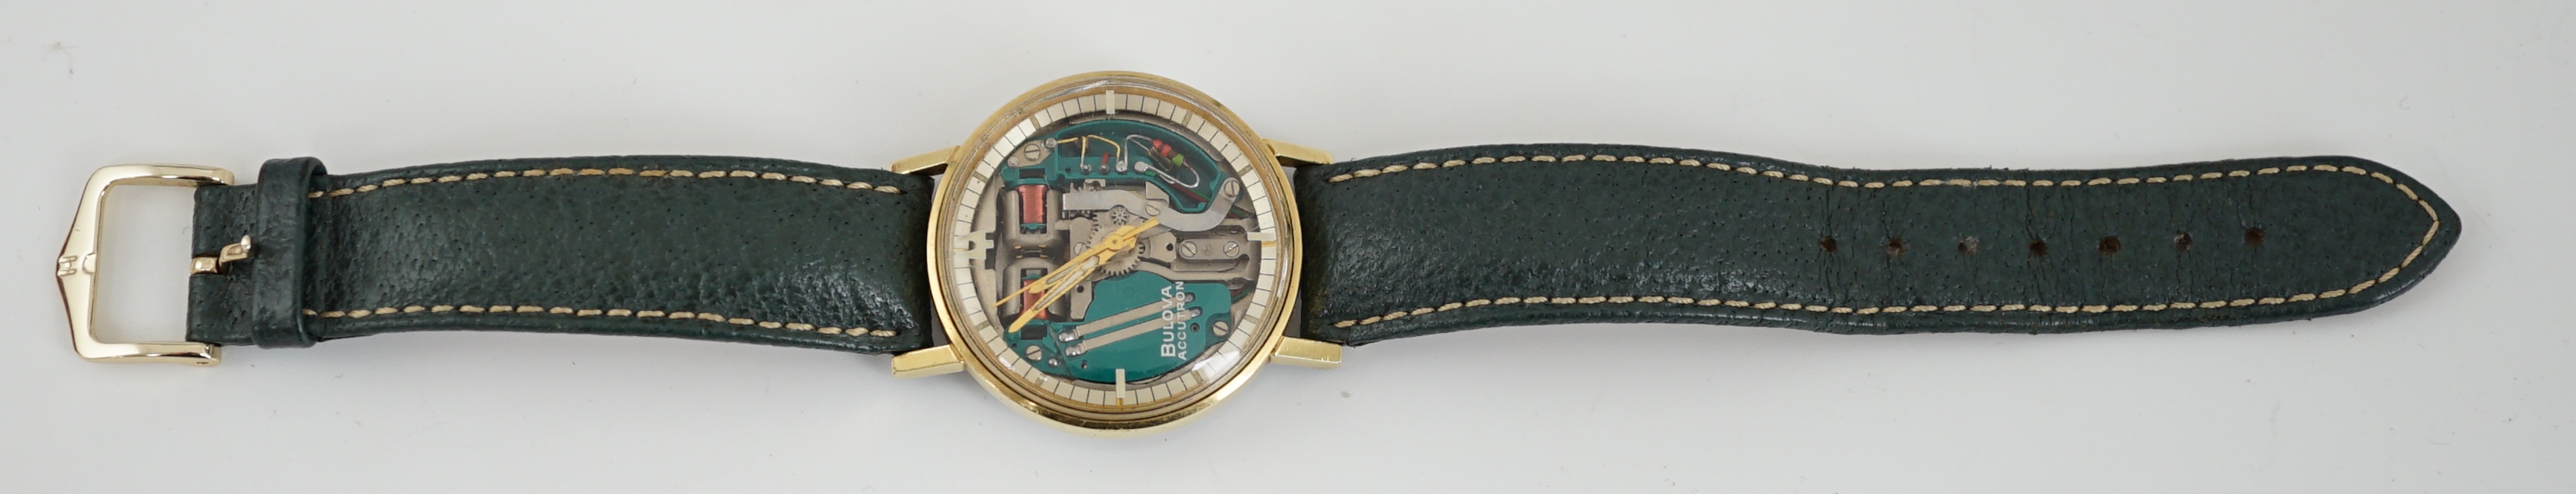 A gentleman's circa 1970's steel and gold plated Bulova Accutron Spaceview wrist watch